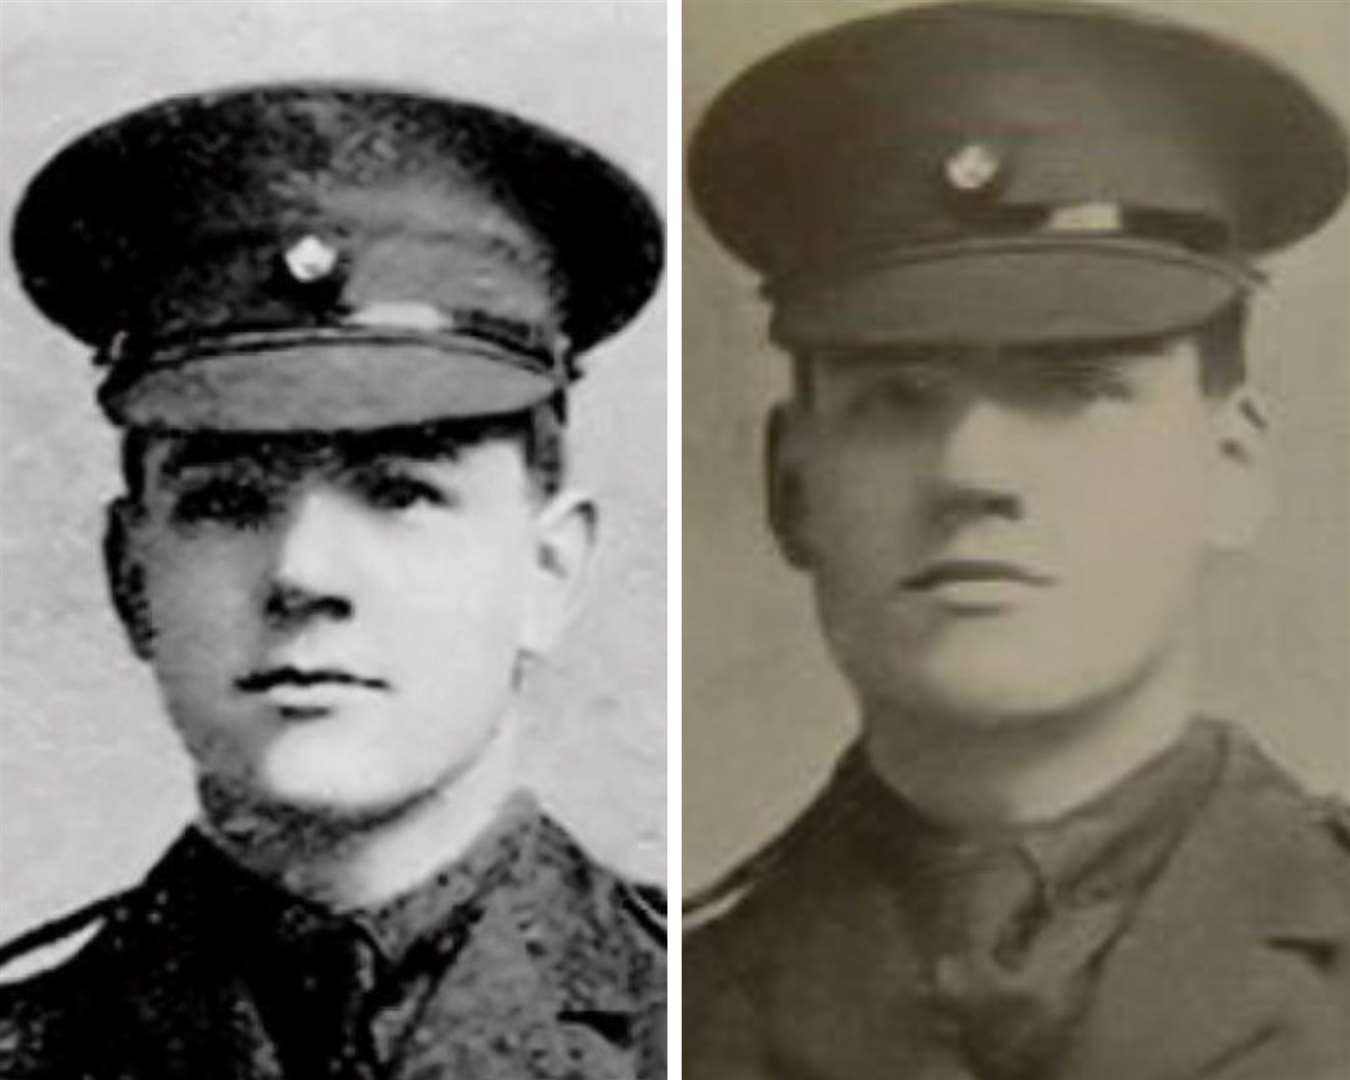 Wallace Langford and his brother John. Both died in 1916